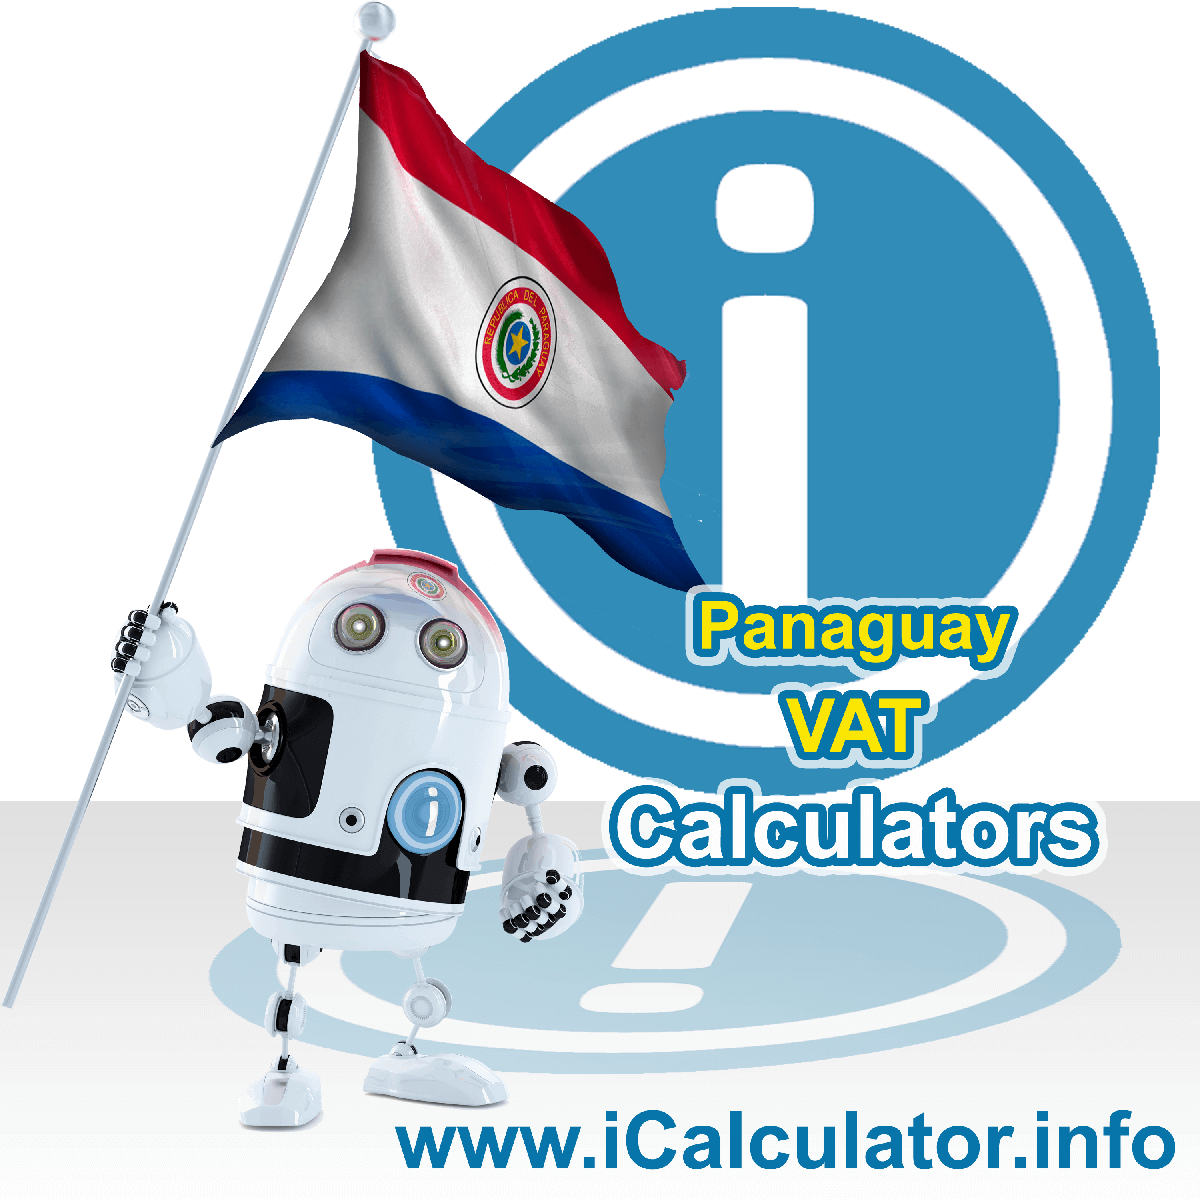 Paraguay VAT Calculator. This image shows the Paraguay flag and information relating to the VAT formula used for calculating Value Added Tax in Paraguay using the Paraguay VAT Calculator in 2024